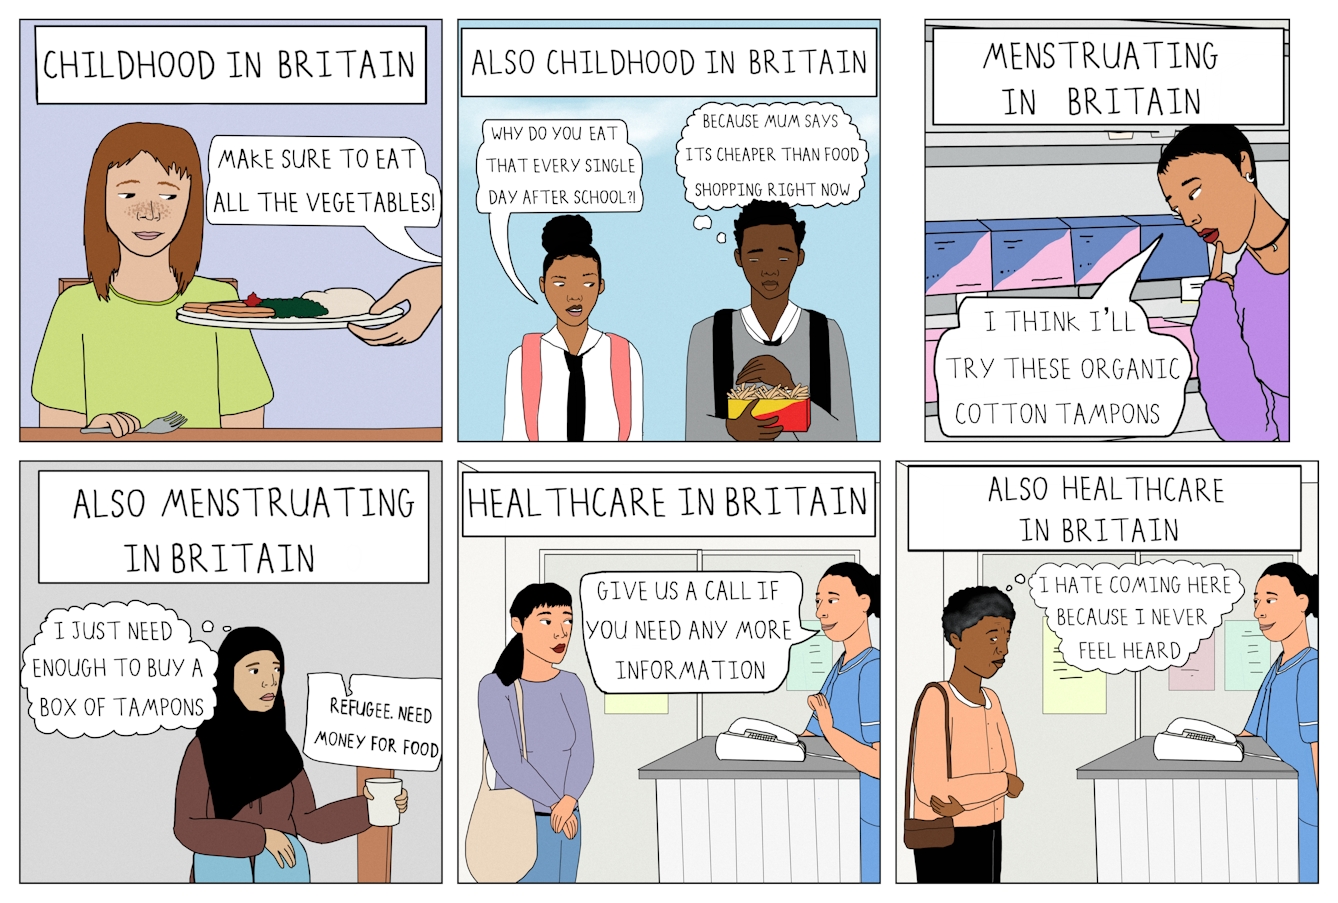 Six panel colour comic strip in a grid of 3 panels wide by 2 panels high.

The first panel shows a white text banner which reads ‘Childhood in Britain’. There is a girl with shoulder length brown hair and freckles sitting down at the dinner table and holding a fork. She is looking at a plate of food being handed to her. A speech bubble comes from the person handing her the food and says ‘Make sure to eat all the vegetables!’ 

The second panel shows a white text banner which reads ‘Also childhood in Britain’. Shown is a boy and a girl wearing school uniform, standing next to each other outside. The boy who is stood on the right is holding a red and yellow disposable container of chips and looking down at them ashamedly. The girl stood to his left is looking over at the container of chips in disgust. A speech bubble from her reads ‘Why do you eat that every single day after school?!’ A thought bubble from him reads ‘Because mum says its cheaper than food shopping right now’.

The third panel shows a white text banner which reads ‘Menstruating in Britain’. Shown is a woman with a cropped pixie haircut, choker necklace, earrings, and red lipstick. She is in a shop looking down at a shelf full of blue and pink tampon boxes. She has one finger raised to her chin thoughtfully. A speech bubble from her reads ‘I think I’ll try these organic cotton tampons’. 

The fourth panel shows a white text banner which reads ‘Also menstruating in Britain’. Shown is a woman wearing a black Hijab holding a white cup in her left hand. There is a makeshift sign standing up next to her which reads ‘Refugee. Need money for food’. The woman has a helpless expression and is slightly slouched. A thought bubble from her reads ‘I just need enough to buy a box of tampons’.

The fifth panel shows a white text banner which reads ‘Healthcare in Britain’. A woman wearing blue medical scrubs is standing behind a reception desk with a telephone on it. She is smiling at a second woman who is stood in front of the receptionist desk. She has a black fringe and ponytail and is carrying a shoulder bag, looking calmly at the woman in medical scrubs. There are some colourful posters on the wall behind them. A speech bubble comes from the first woman and reads ‘Give us a call if you need any more information’. 

The sixth panel shows a white text banner which reads ‘Also healthcare in Britain’. The same setting is shown, with the woman wearing blue medical scrubs smiling at an elderly Black woman with short hair. The elderly woman is looking sheepishly to the side and has her arms crossed across her torso. A thought bubble comes from her and reads, ‘I hate coming here because I never feel heard’. 